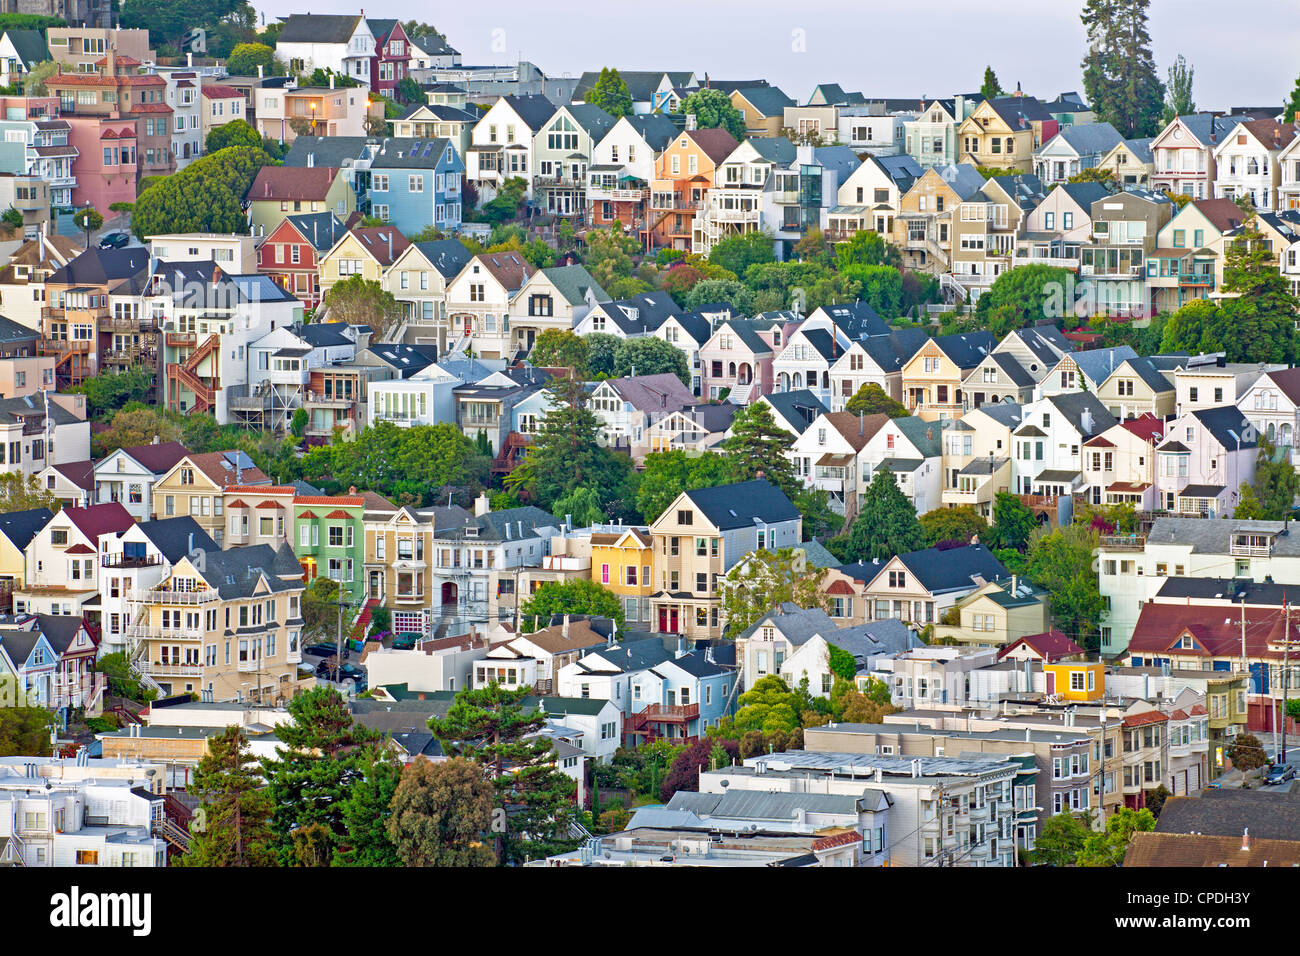 Typical Victorian houses in San Francisco, California, United States of America, North America Stock Photo